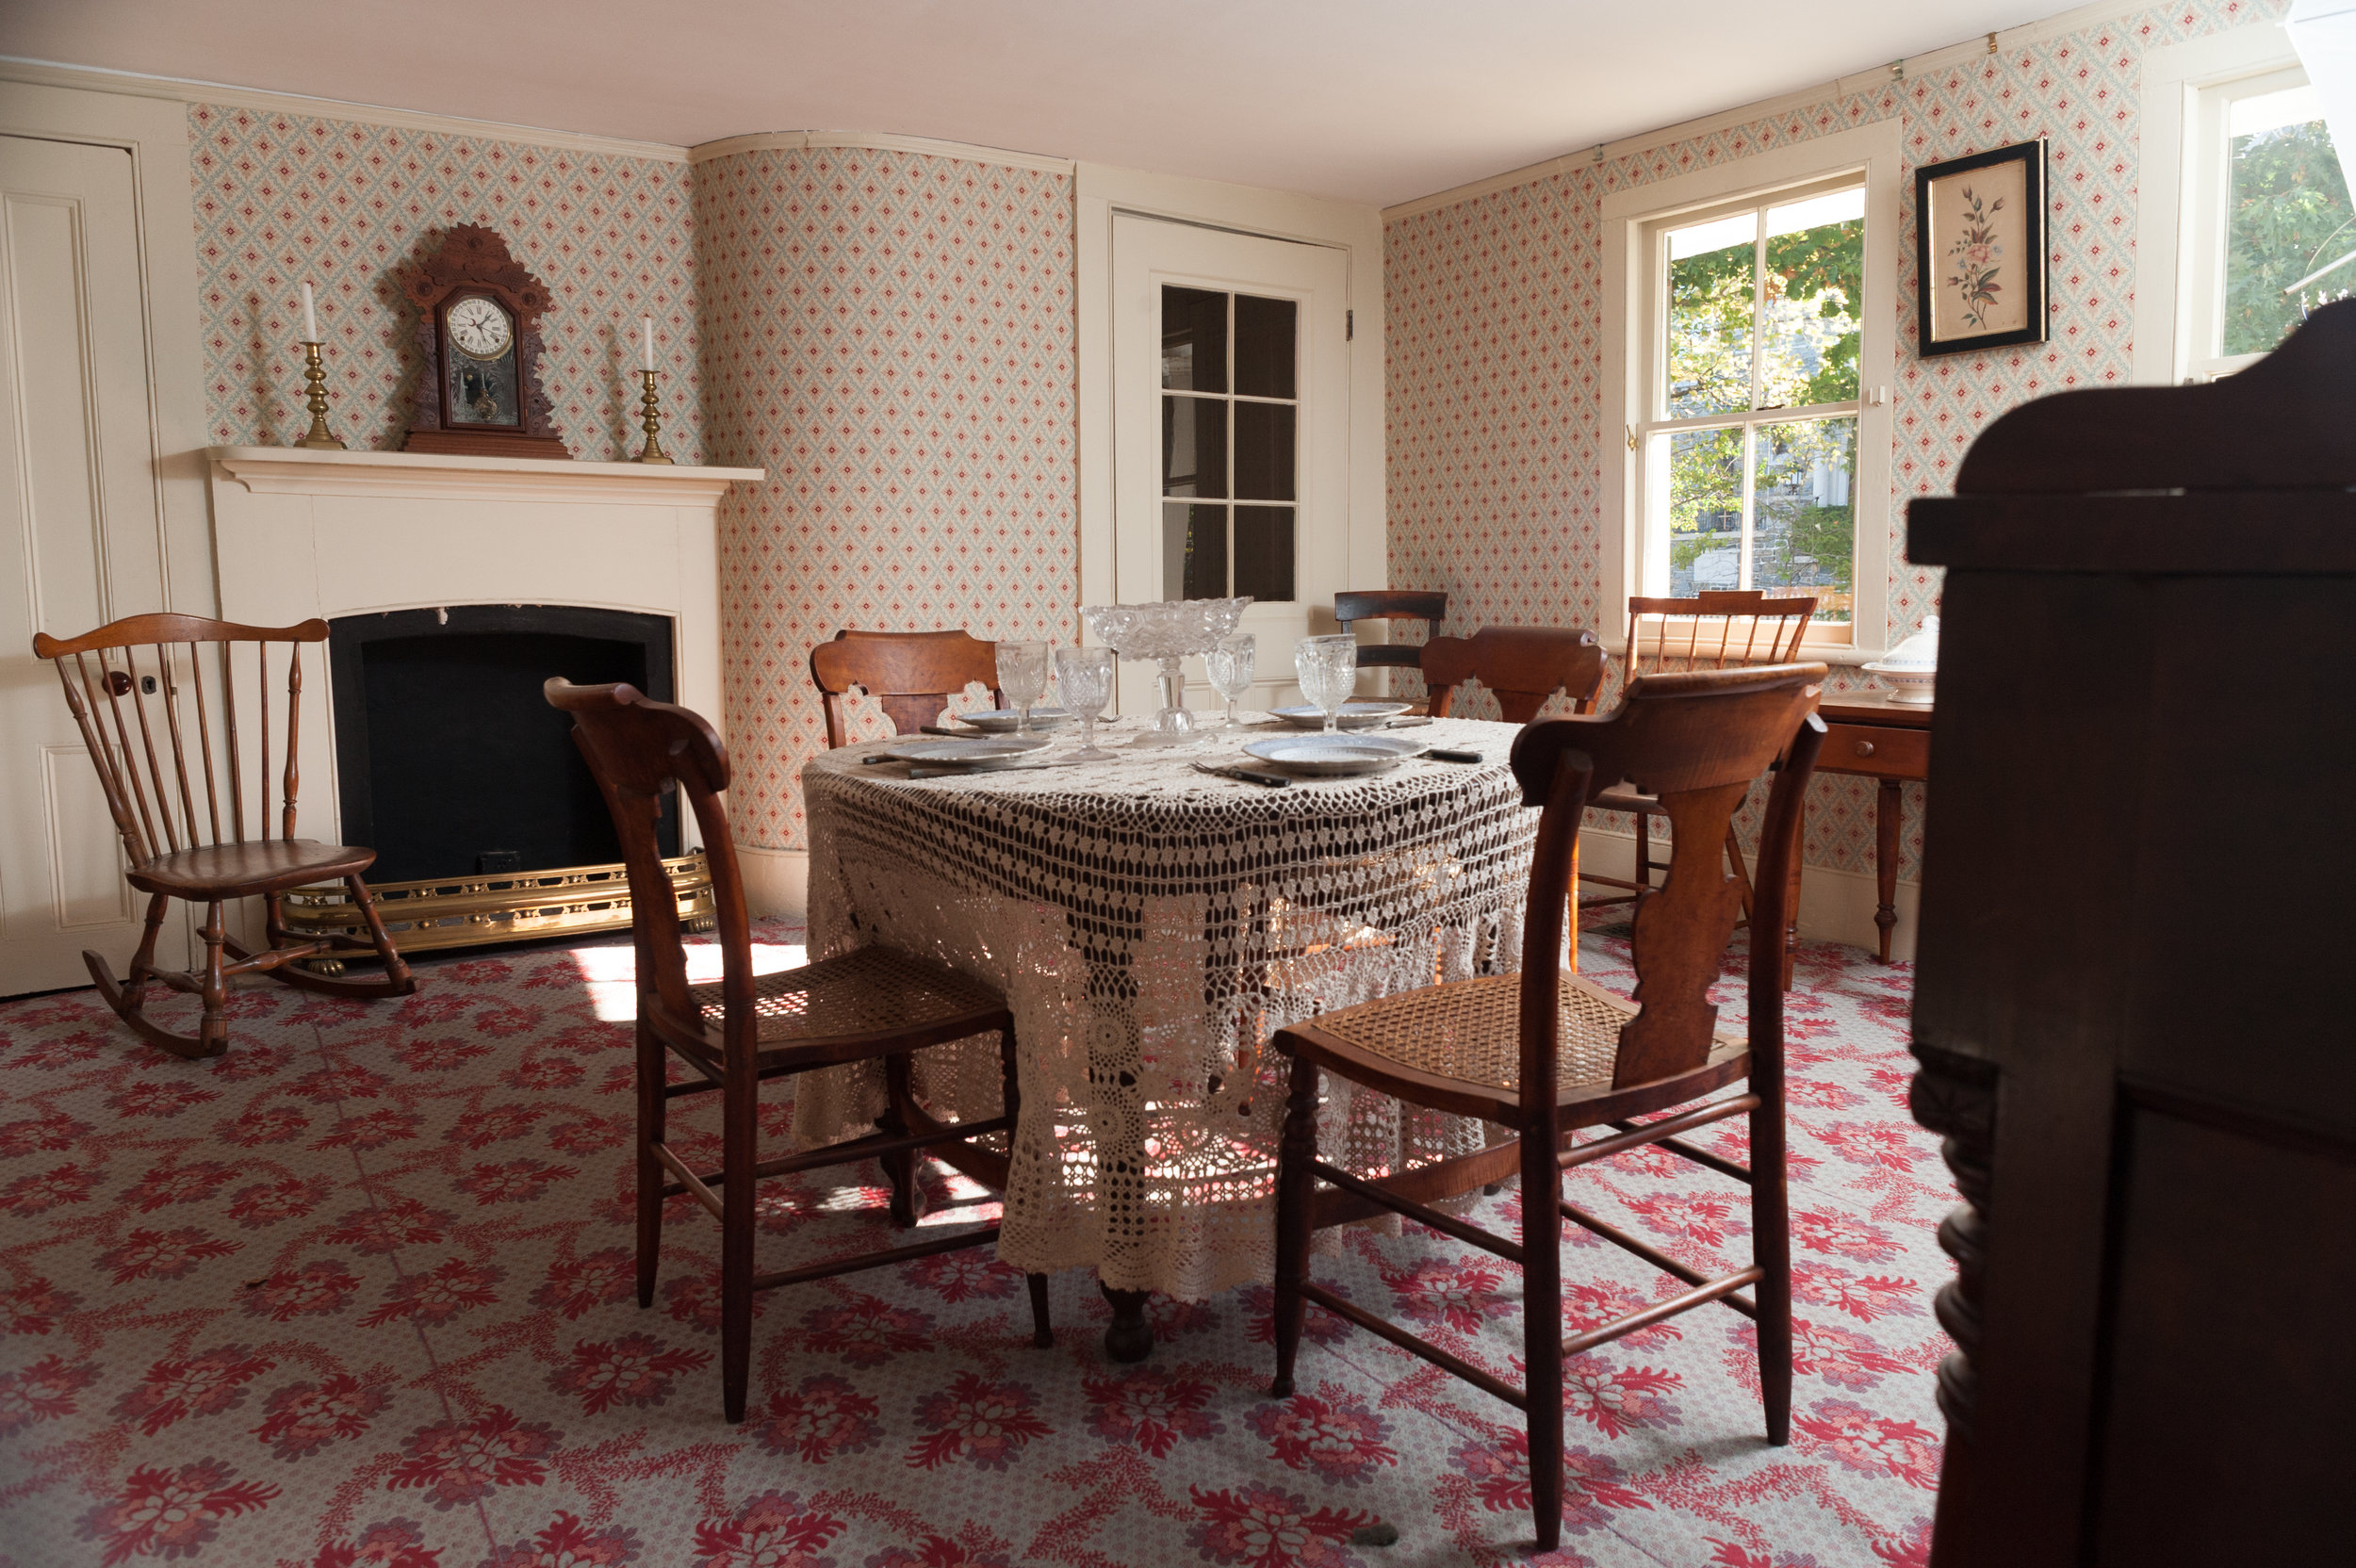 The wallpaper, paint colors, and carpets throughout the house were authentic reproductions of popular designs in the 19th century. The dining room carpet design is named Ballstone. (Copy)